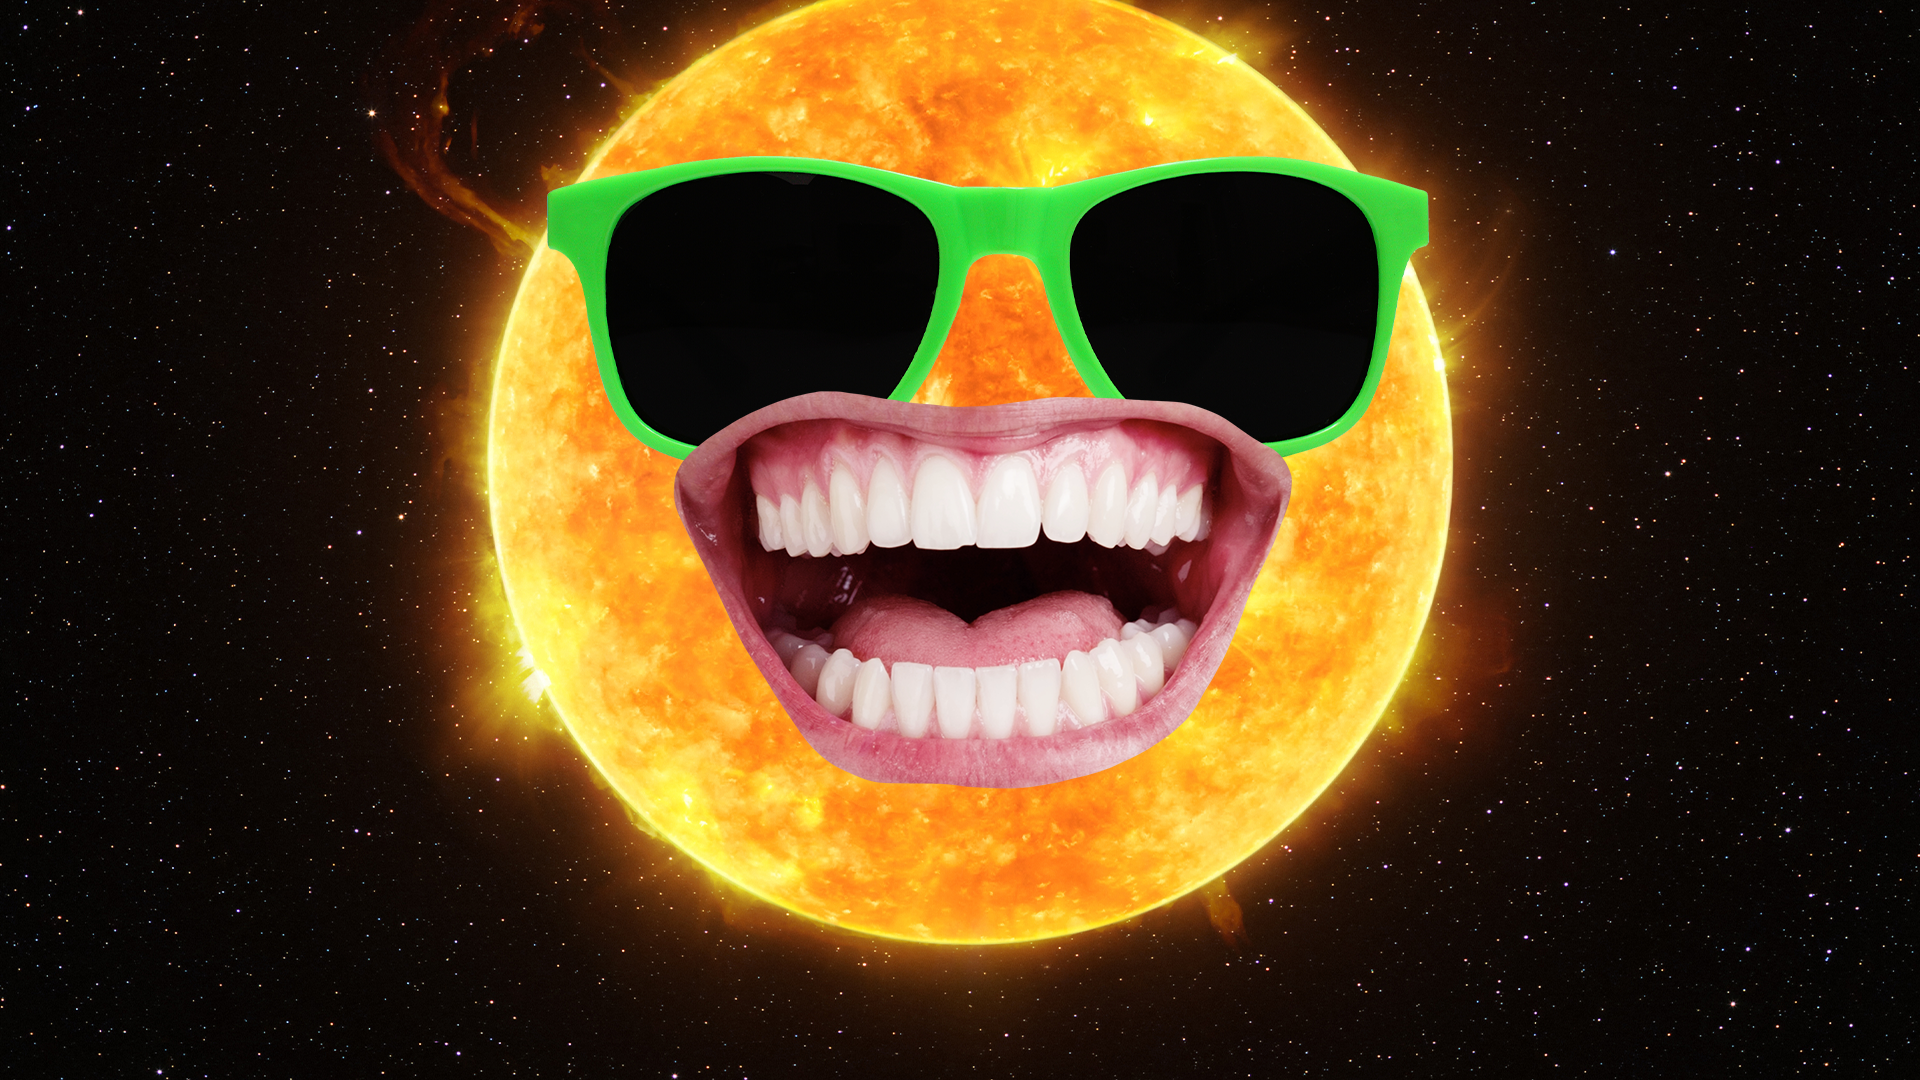 Goofy grinning sun in space